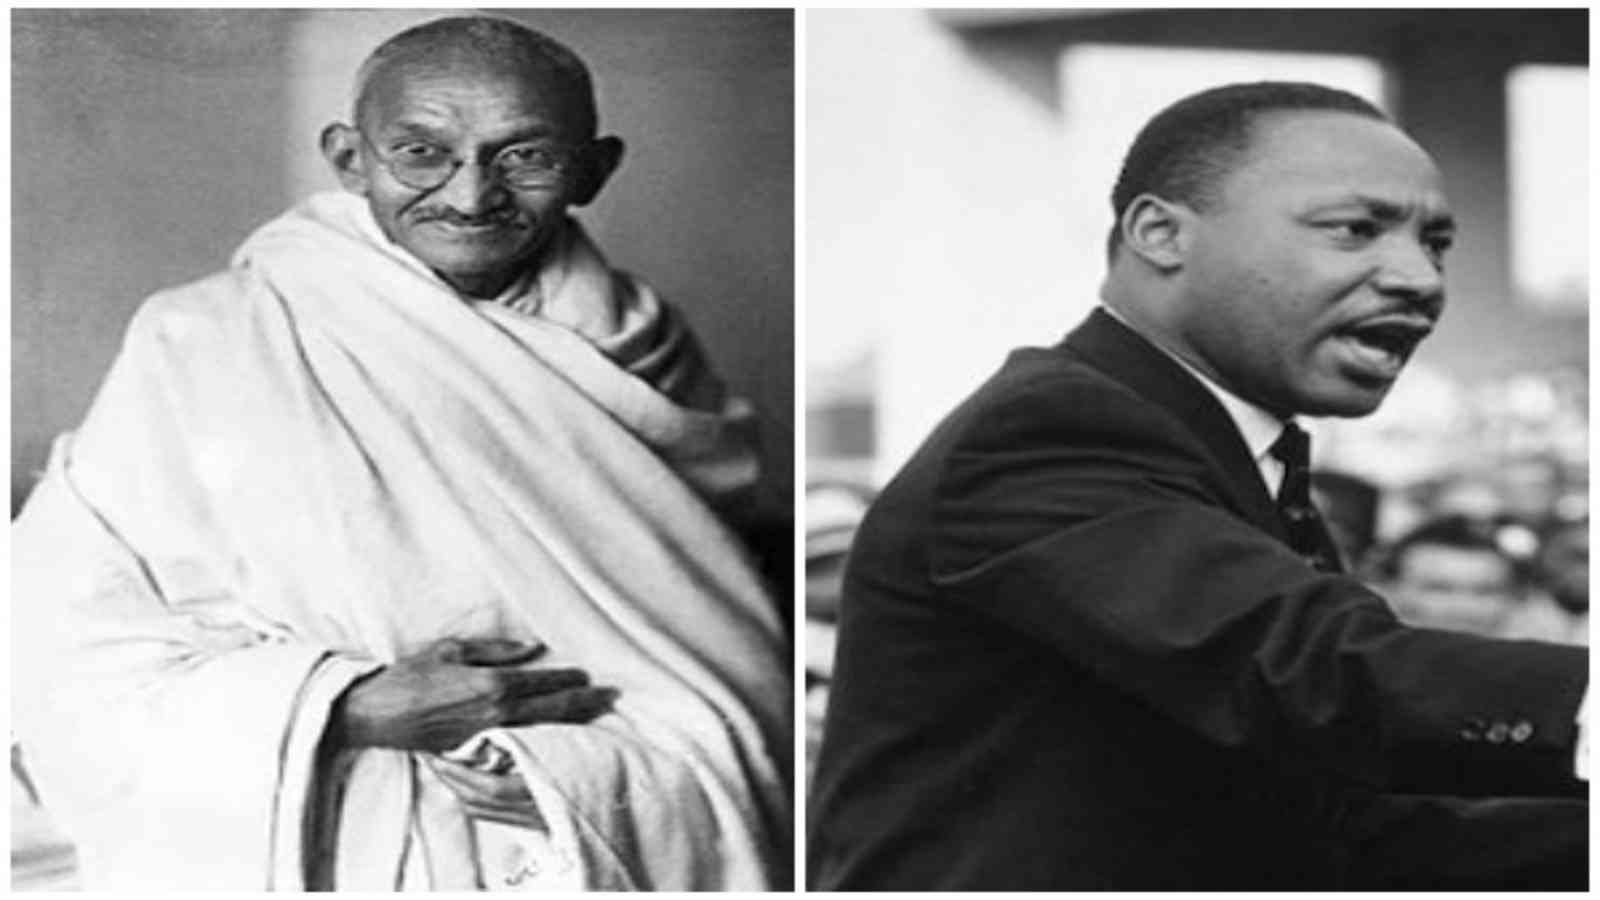 Gandhi King Scholarly exchange initiative launched